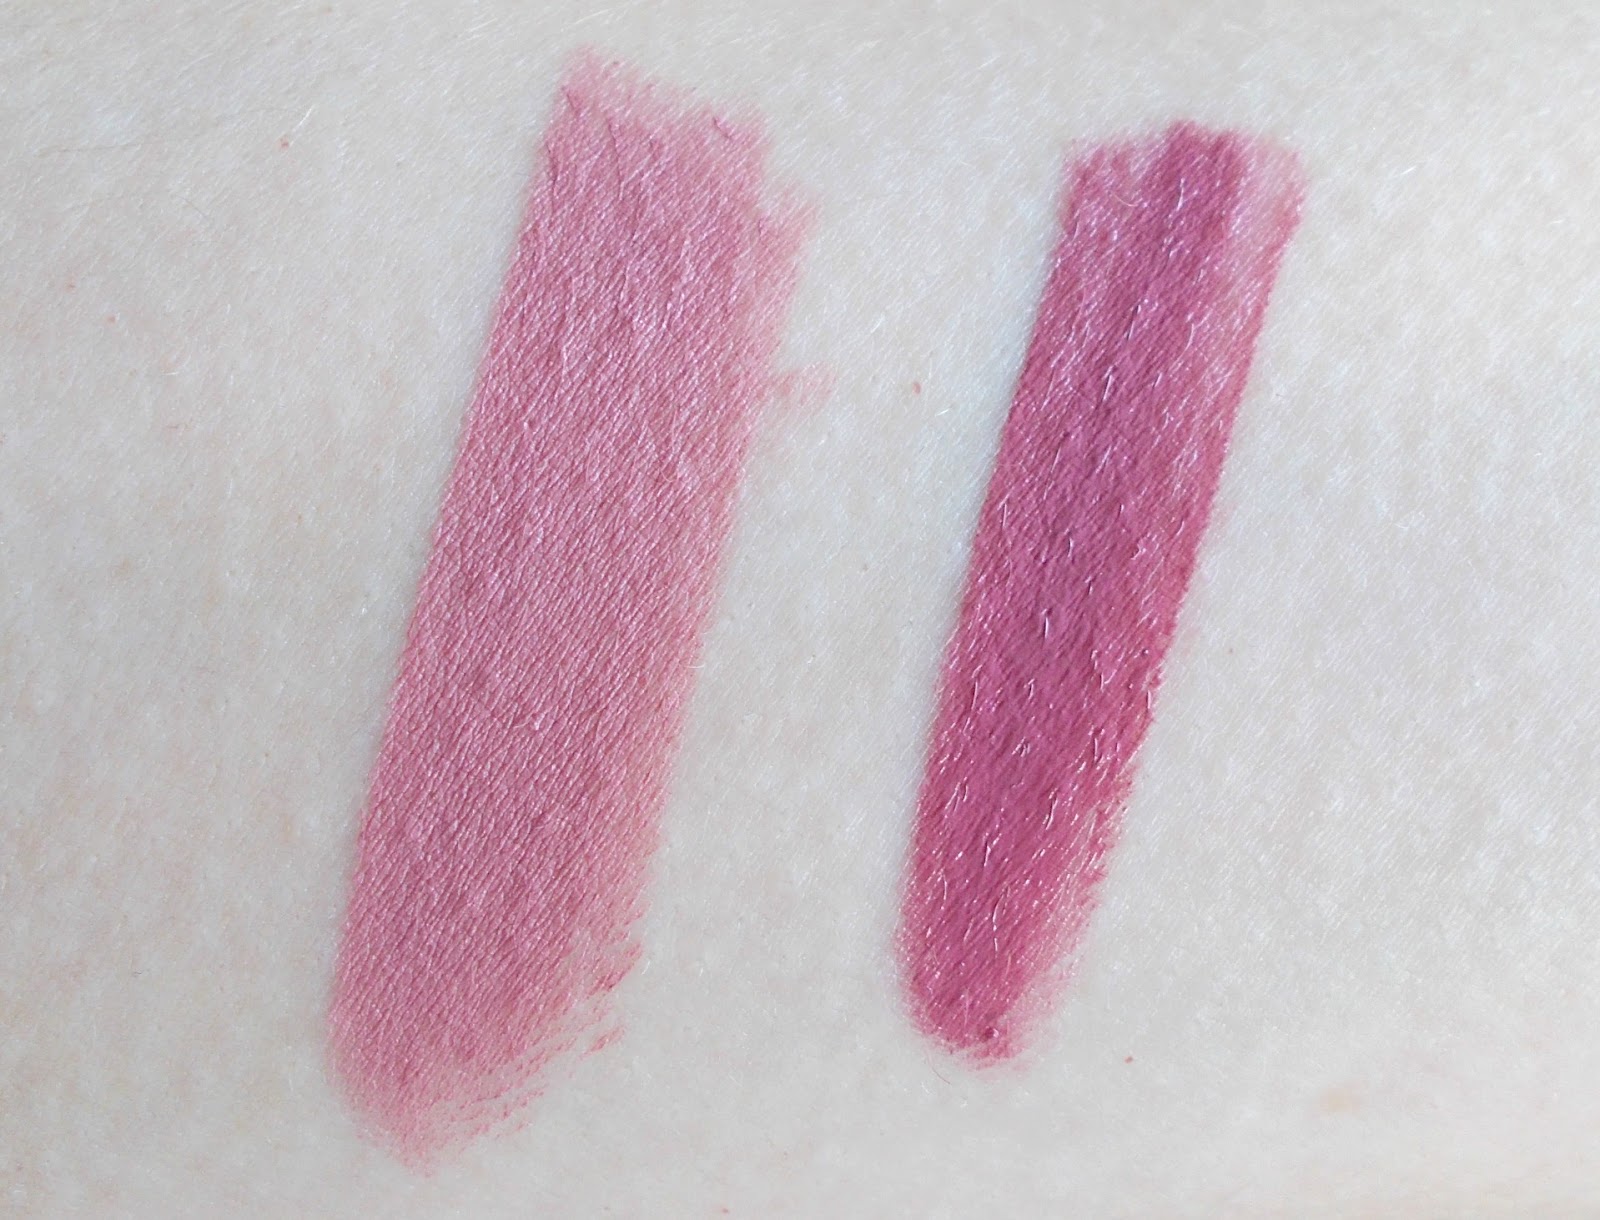 urban decay backtalk too faced melted fig swatch